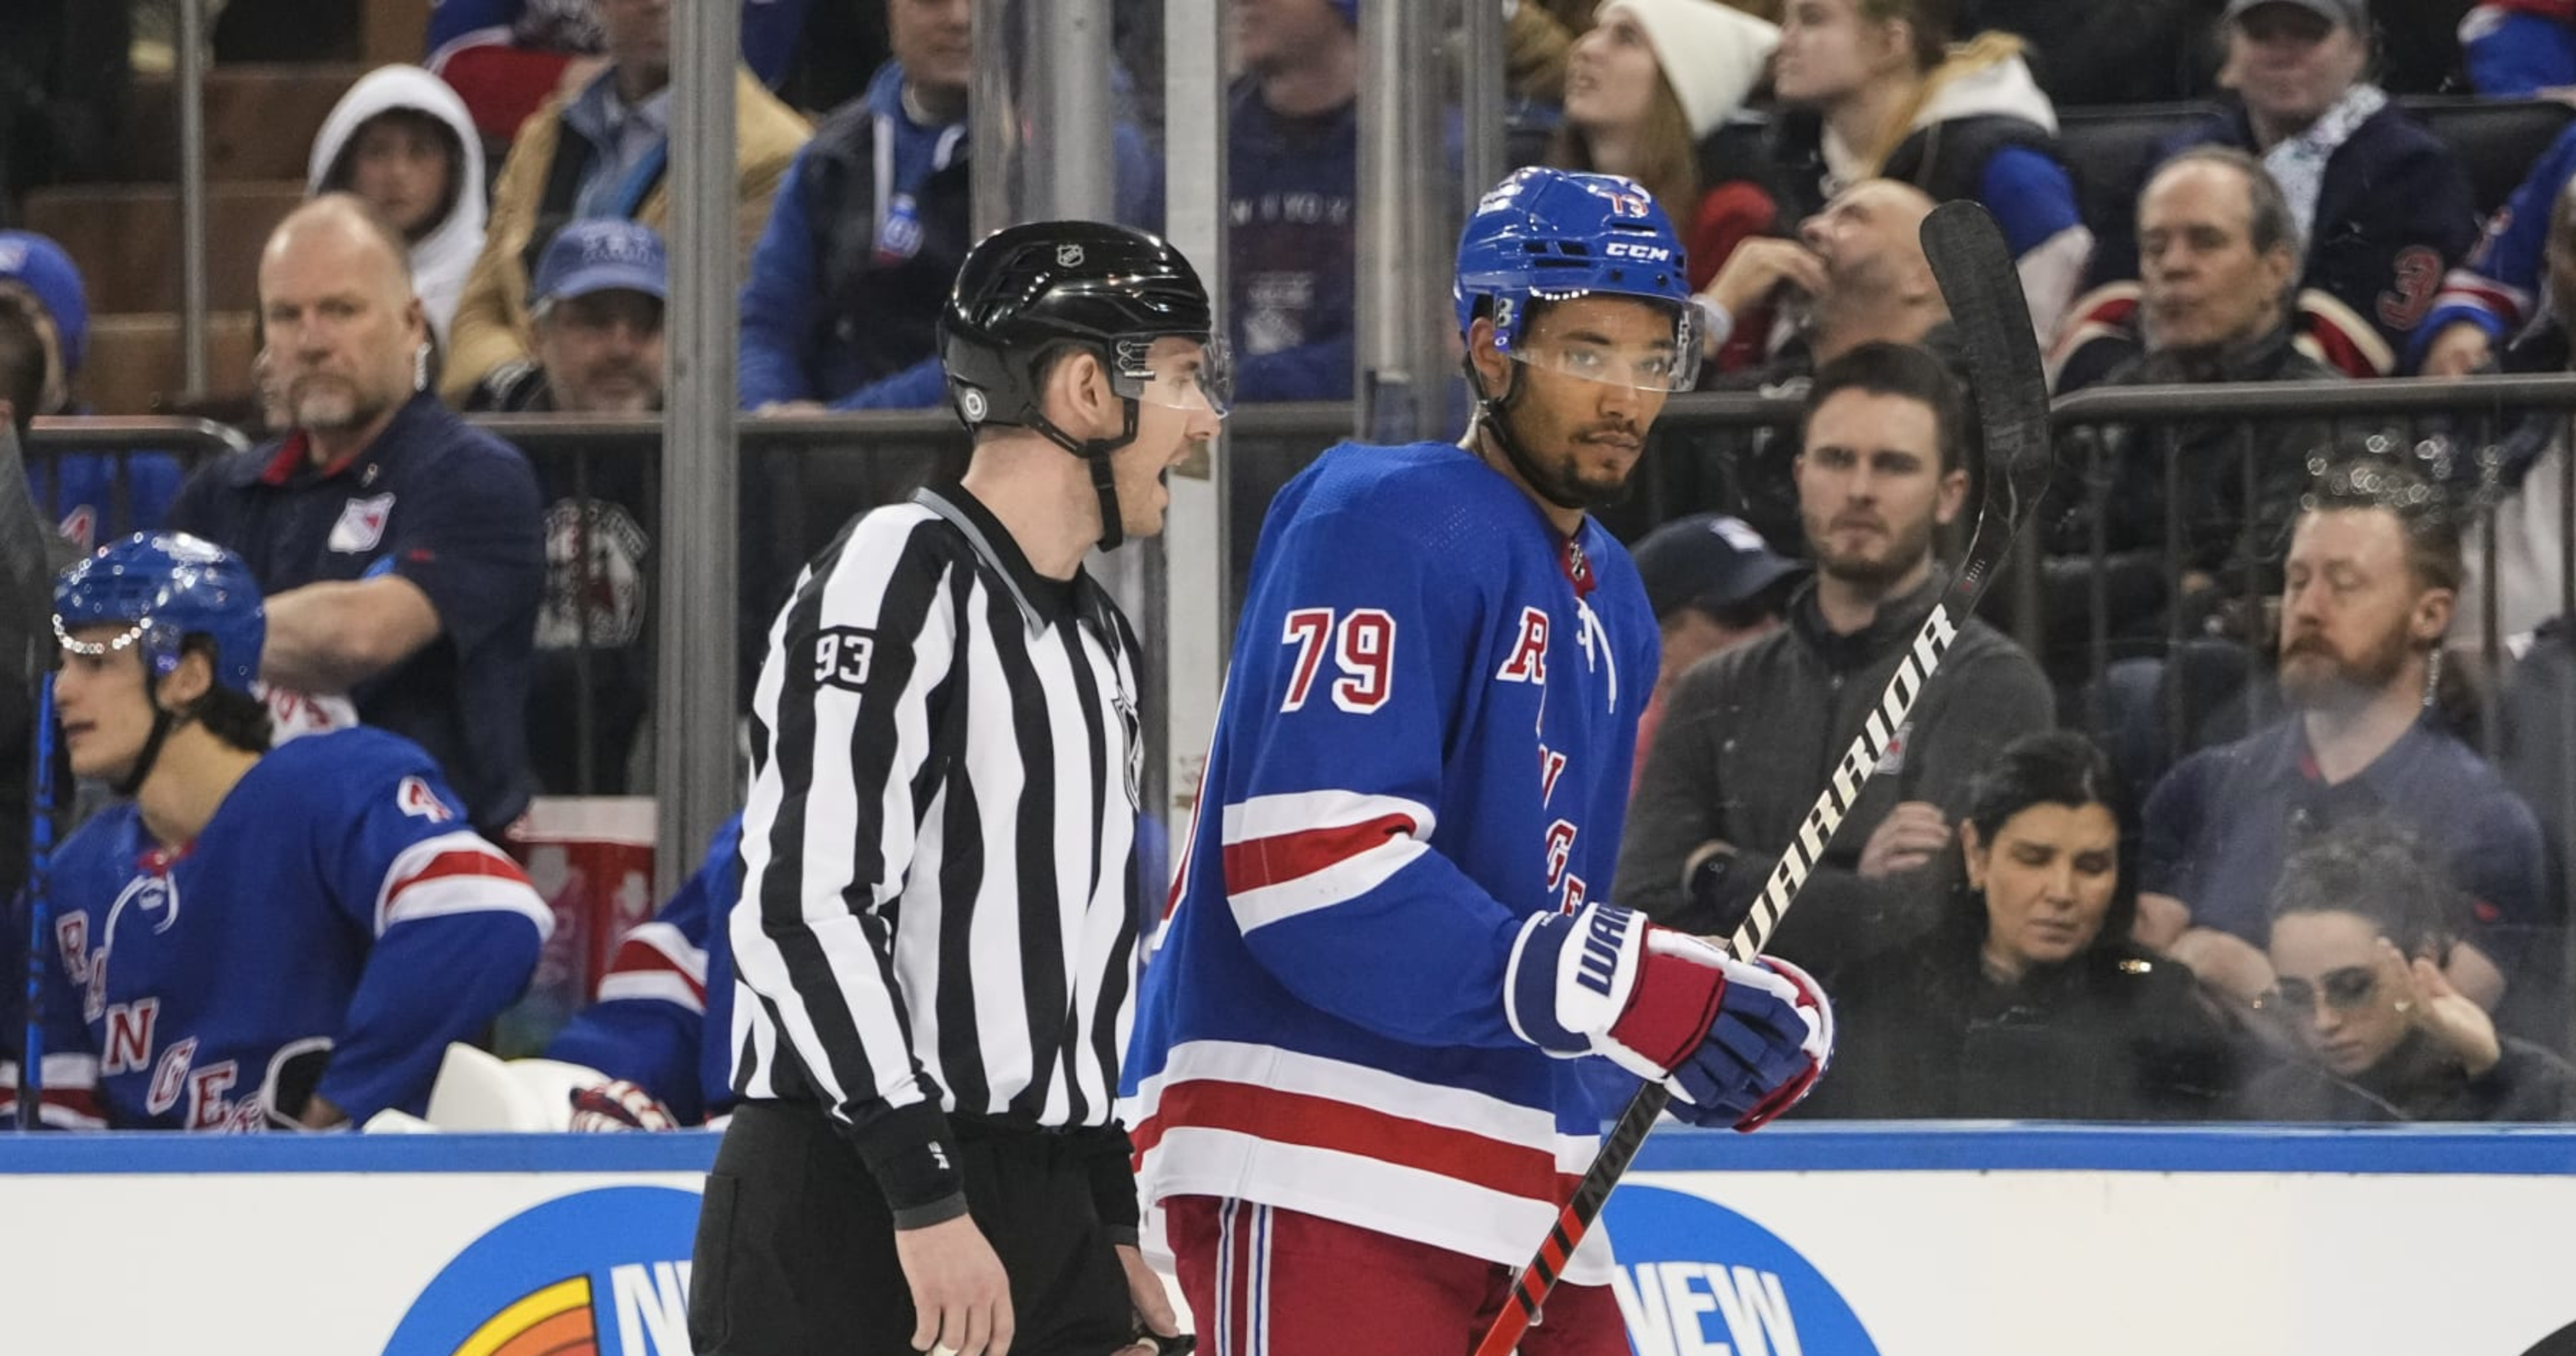 Rangers call-up Ryan Carpenter ahead of battle with Canadiens